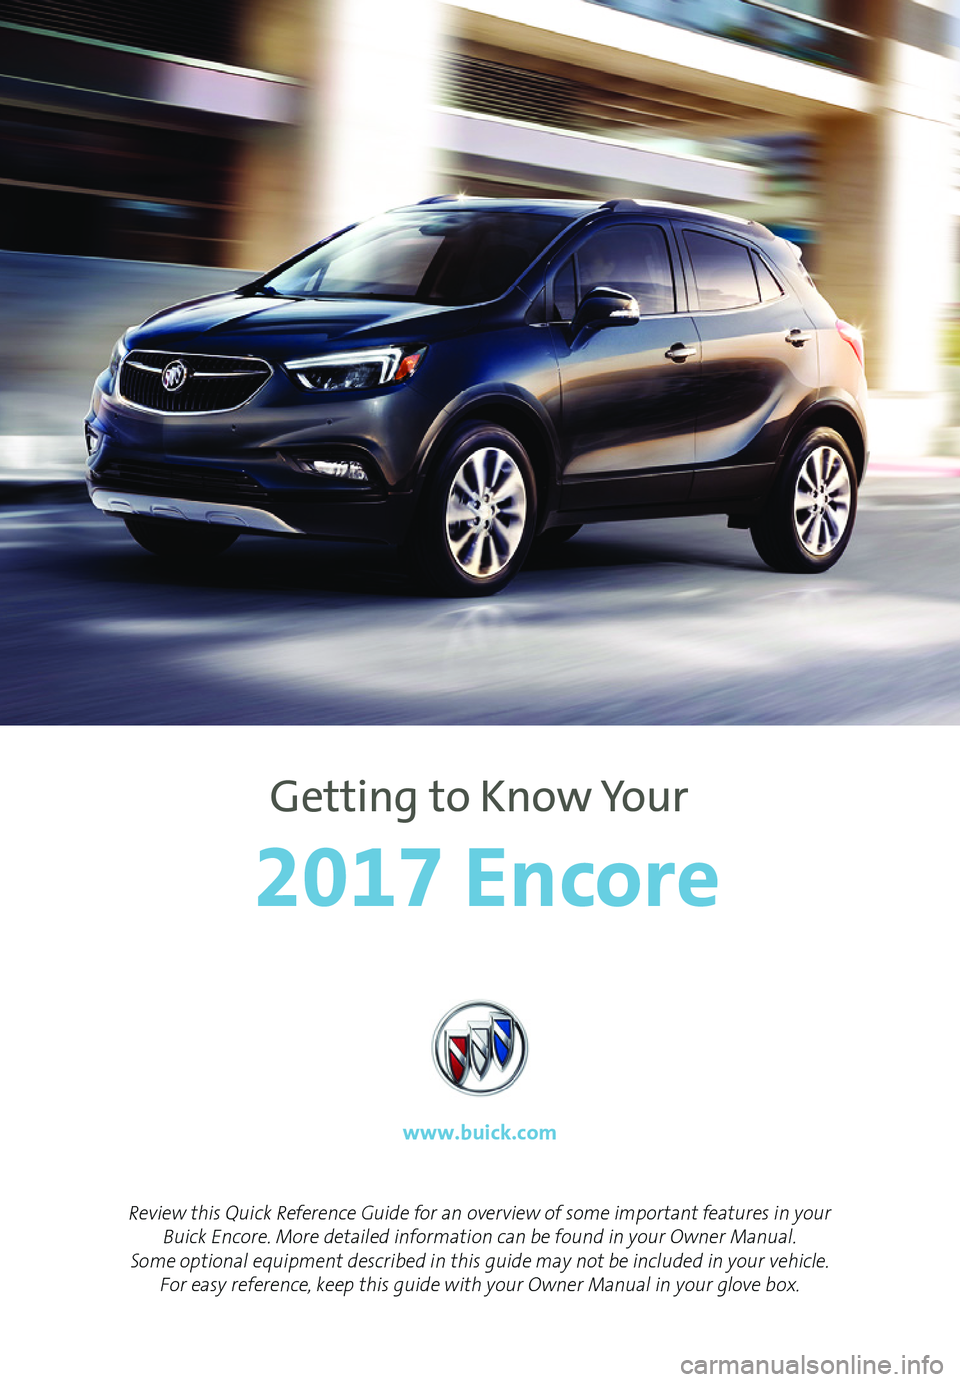 BUICK ENCORE 2017  Get To Know Guide 